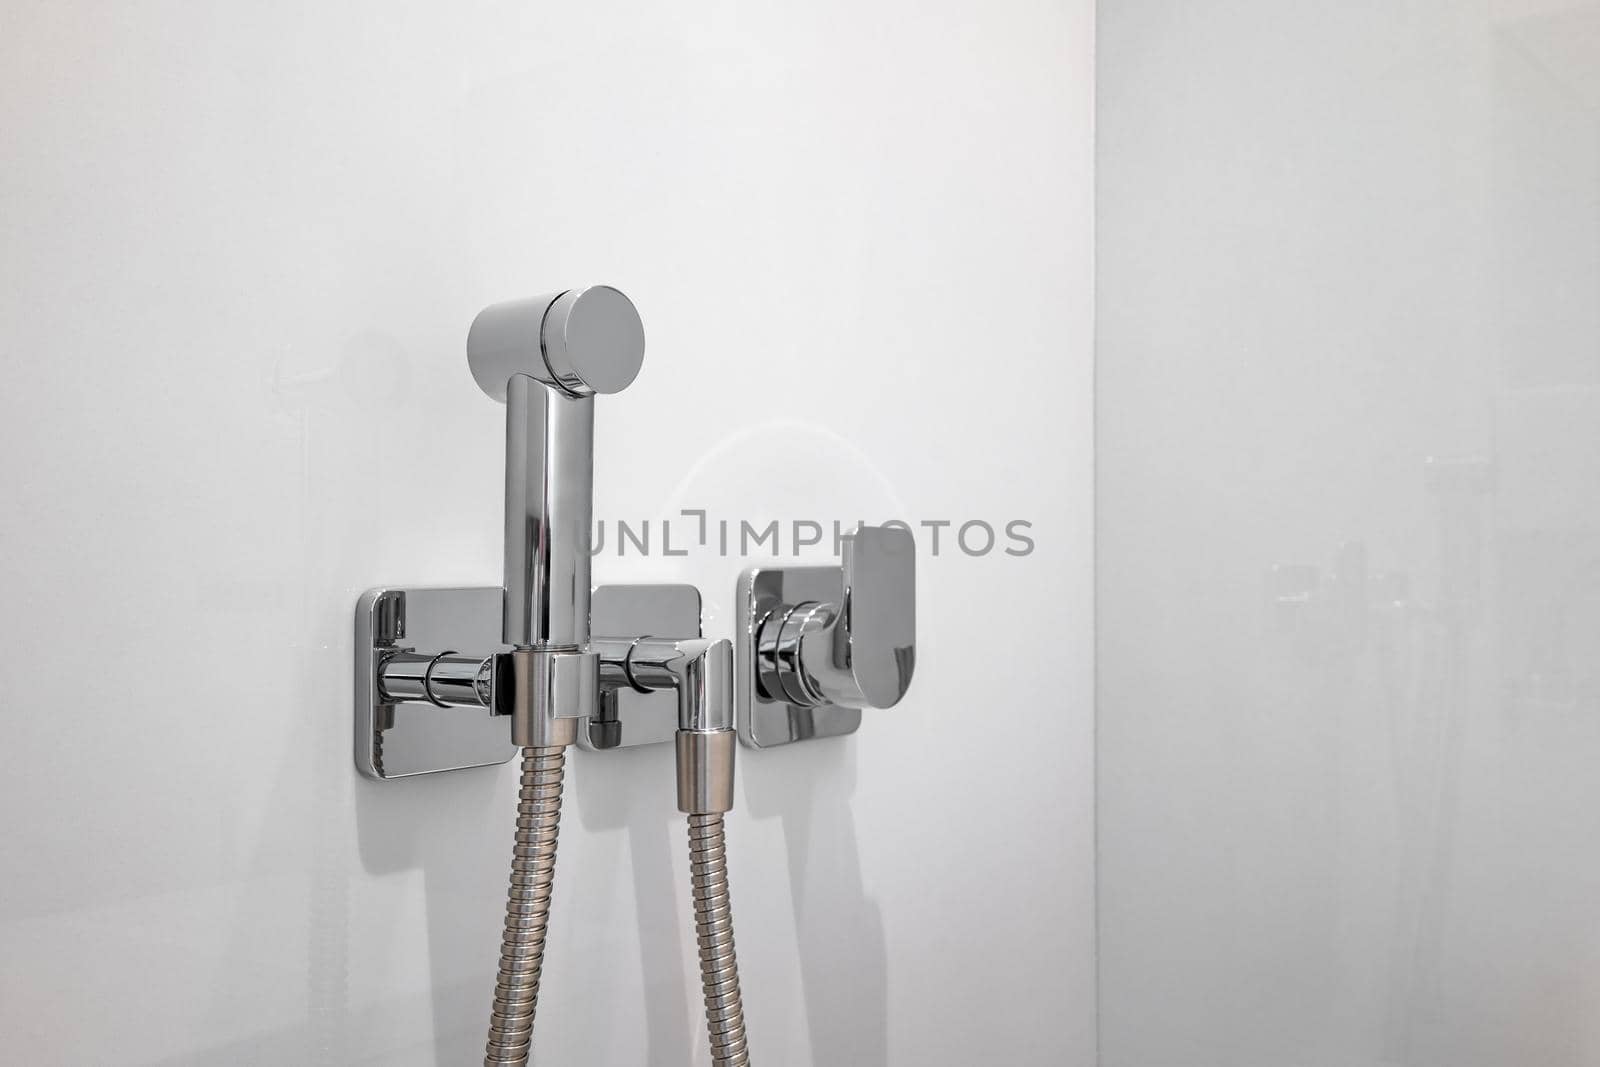 Chromium bidet shower with white tiles in a a toilet. Clean and new spray shower. by apavlin